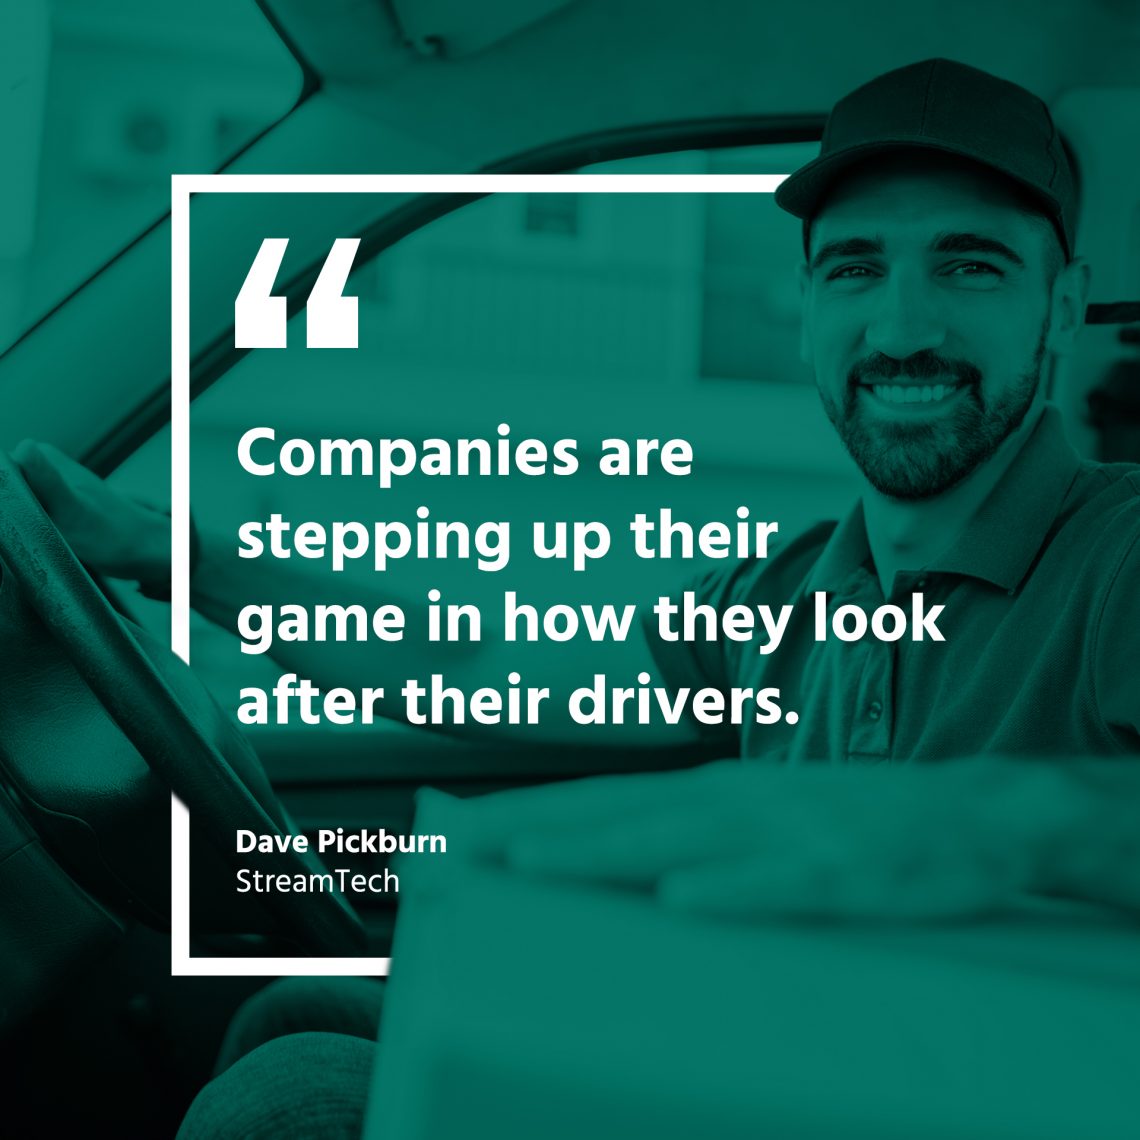 Companies are stepping up their game in terms of how they look after their drivers